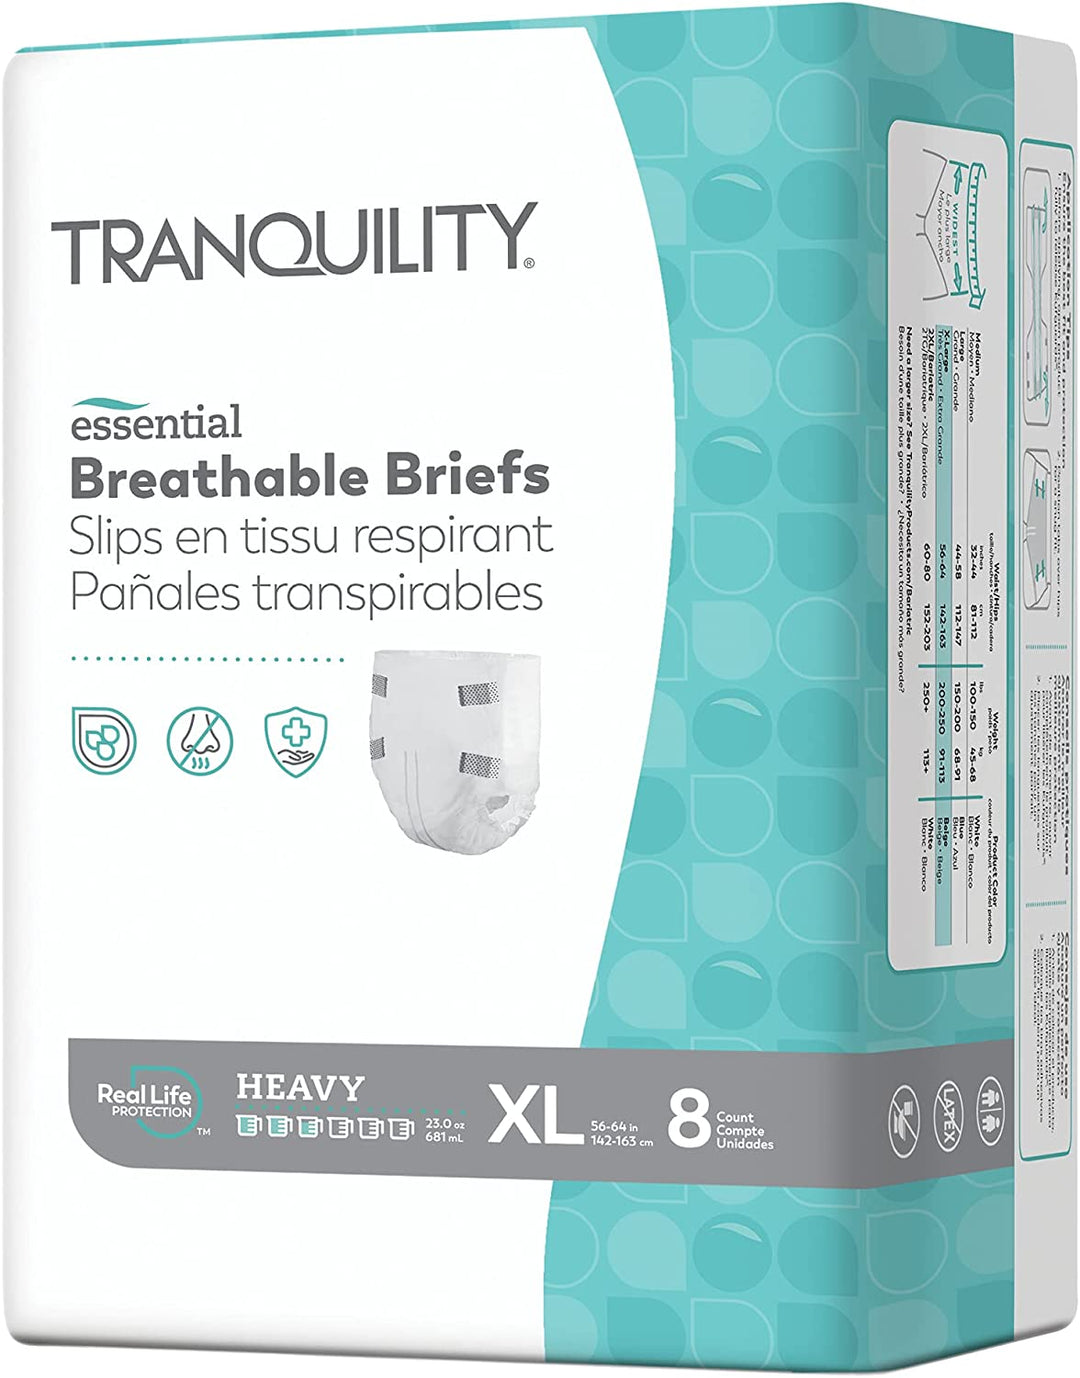 Tranquility Essential Breathable Briefs, Heavy, XL